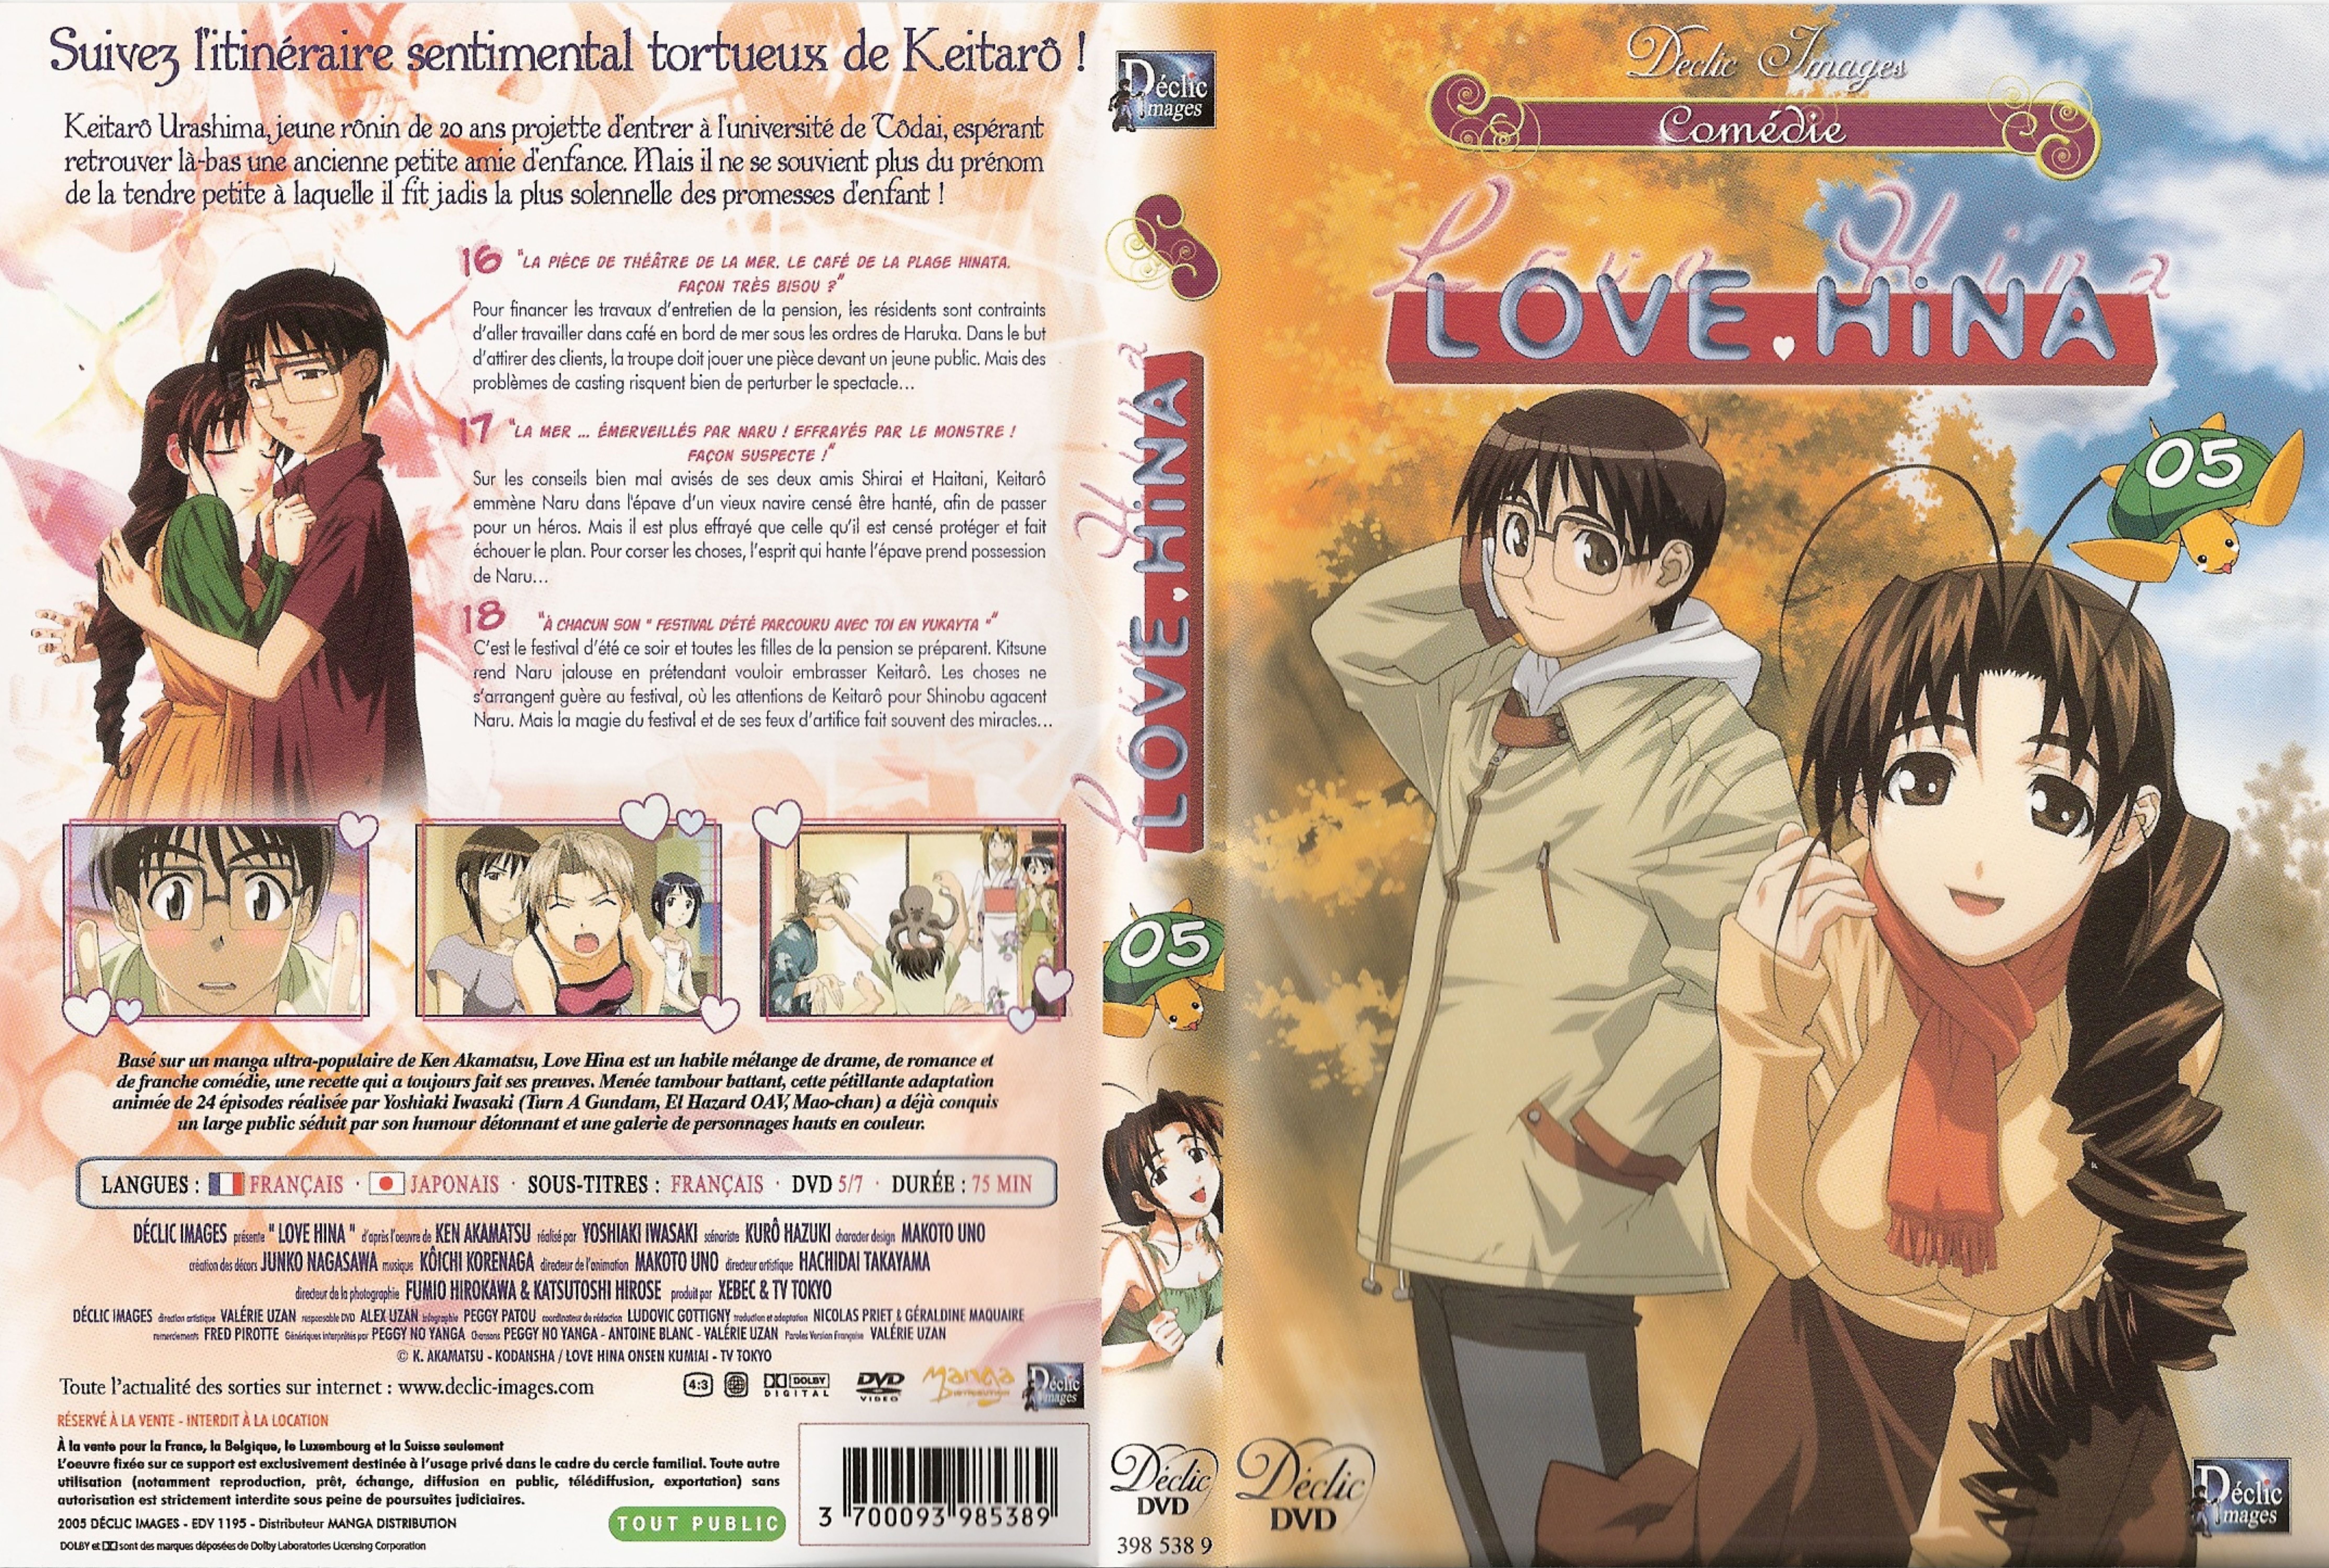 Jaquette DVD Love Hina DVD 05